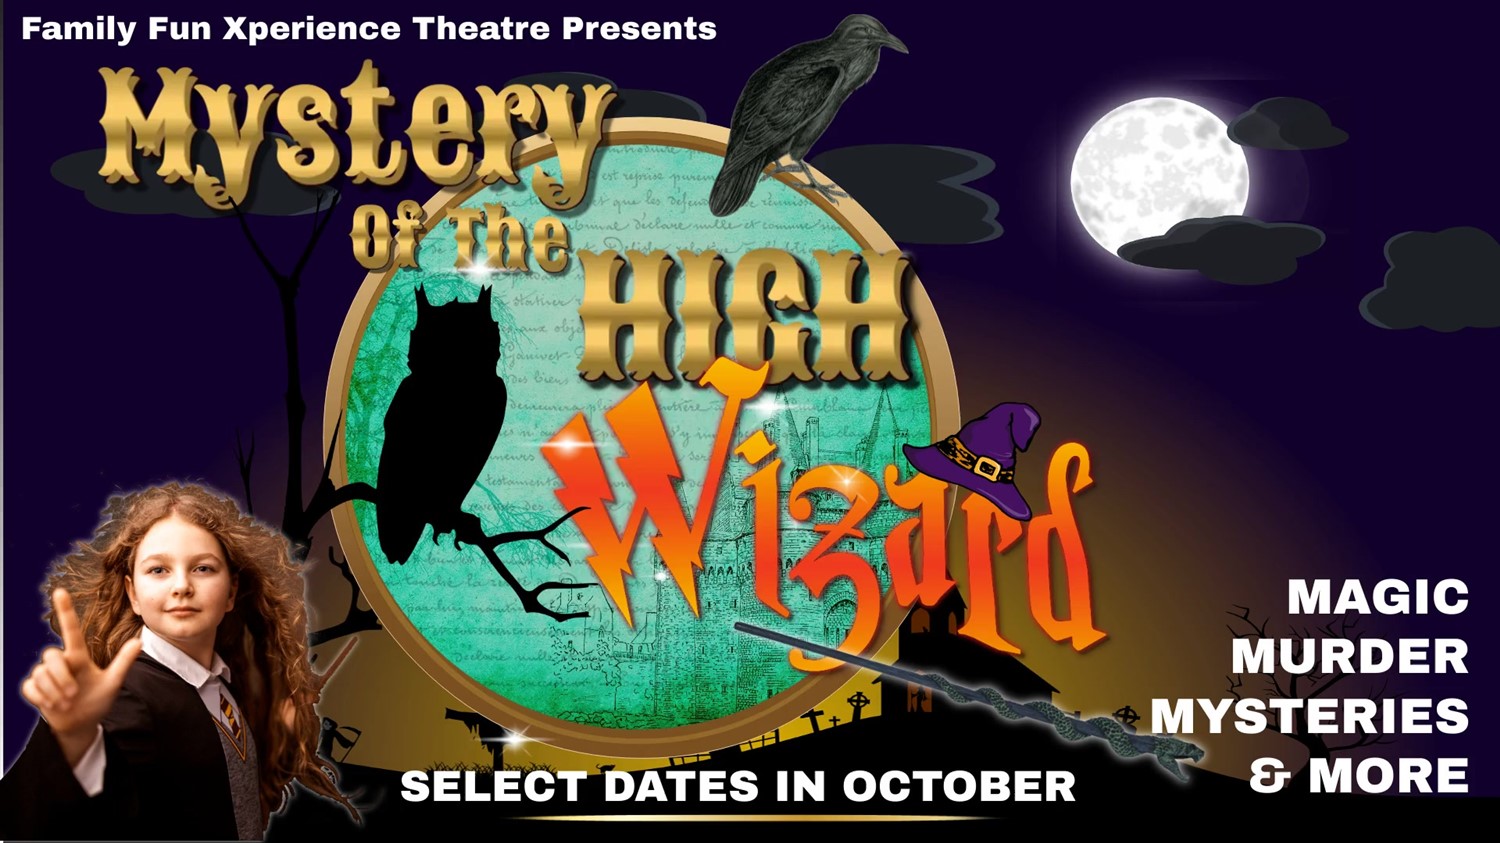 Mystery of the High Wizard Magic, Murder, Mysteries, and More to solve! on Oct 21, 19:00@FFX Theatre - Pick a seat, Buy tickets and Get information on Family Fun Xperience tickets.ffxshow.org